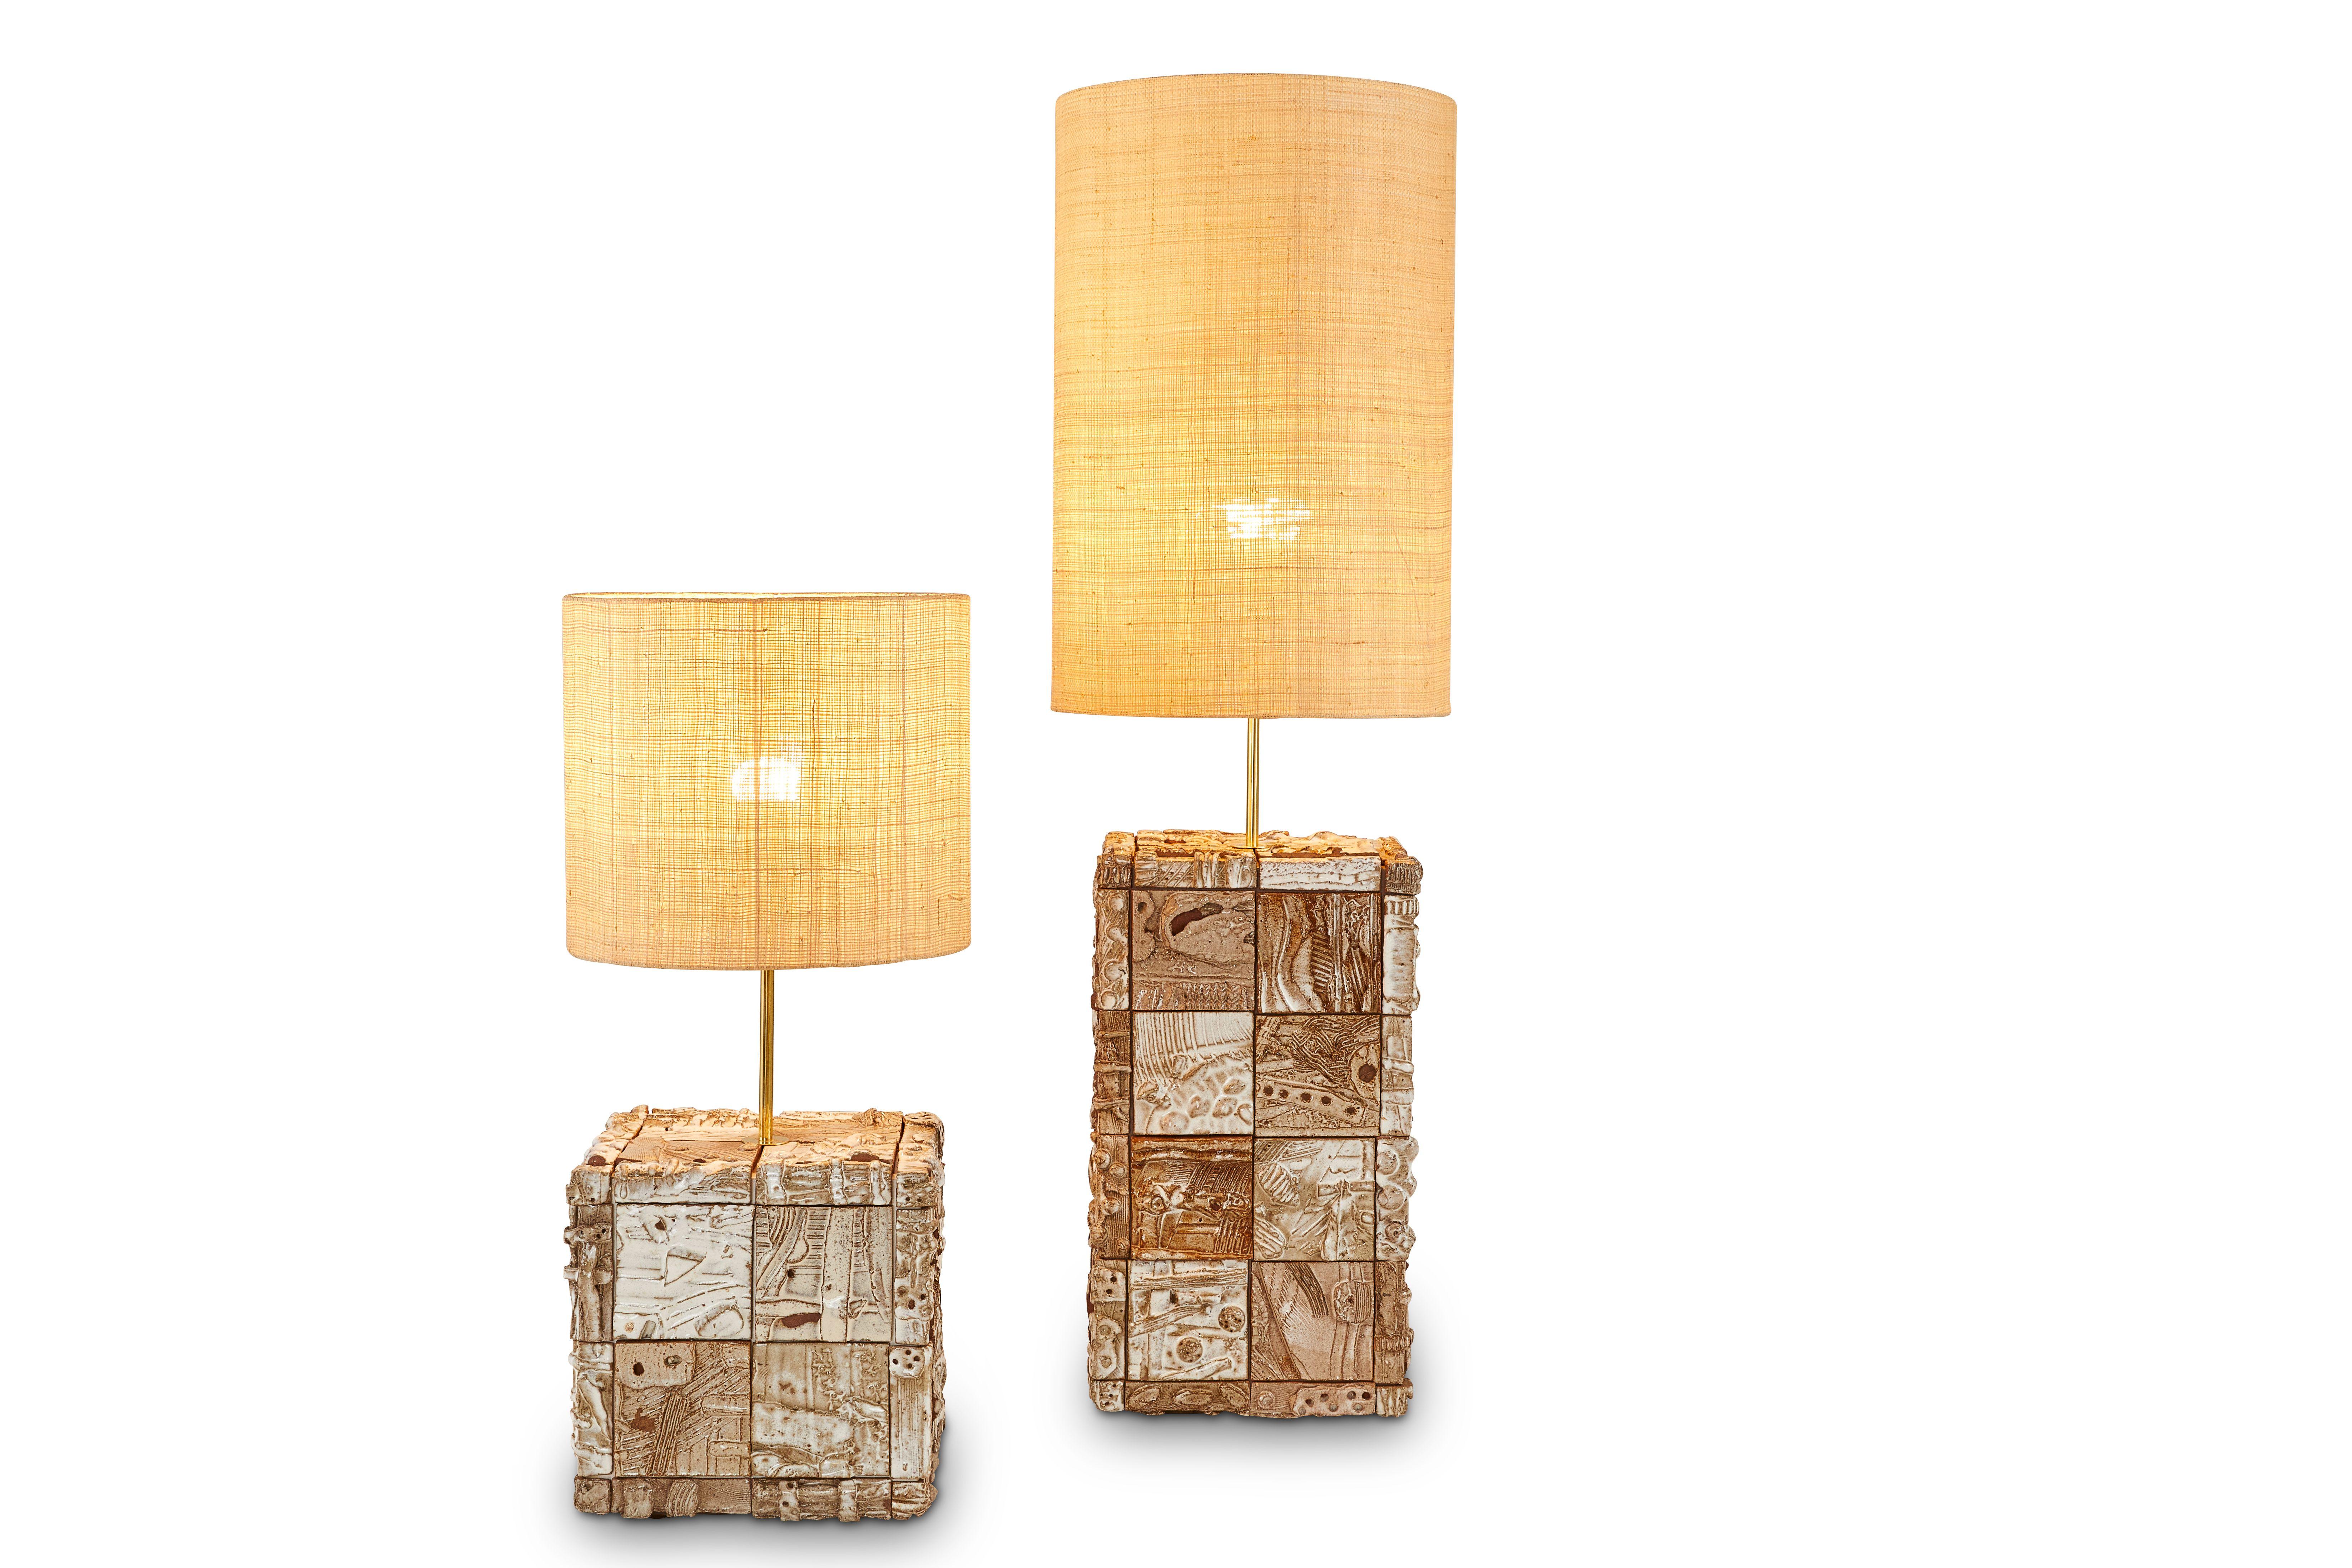 Pair of stella table lamps by Egg Designs
Dimensions:
30 L x 30 D x 60 H cm
30 L x 30 D x 80 H cm
Materials: Handmade ceramic, brass

Founded by South Africans and life partners, Greg and Roche Dry - Egg is a unique perspective in contemporary